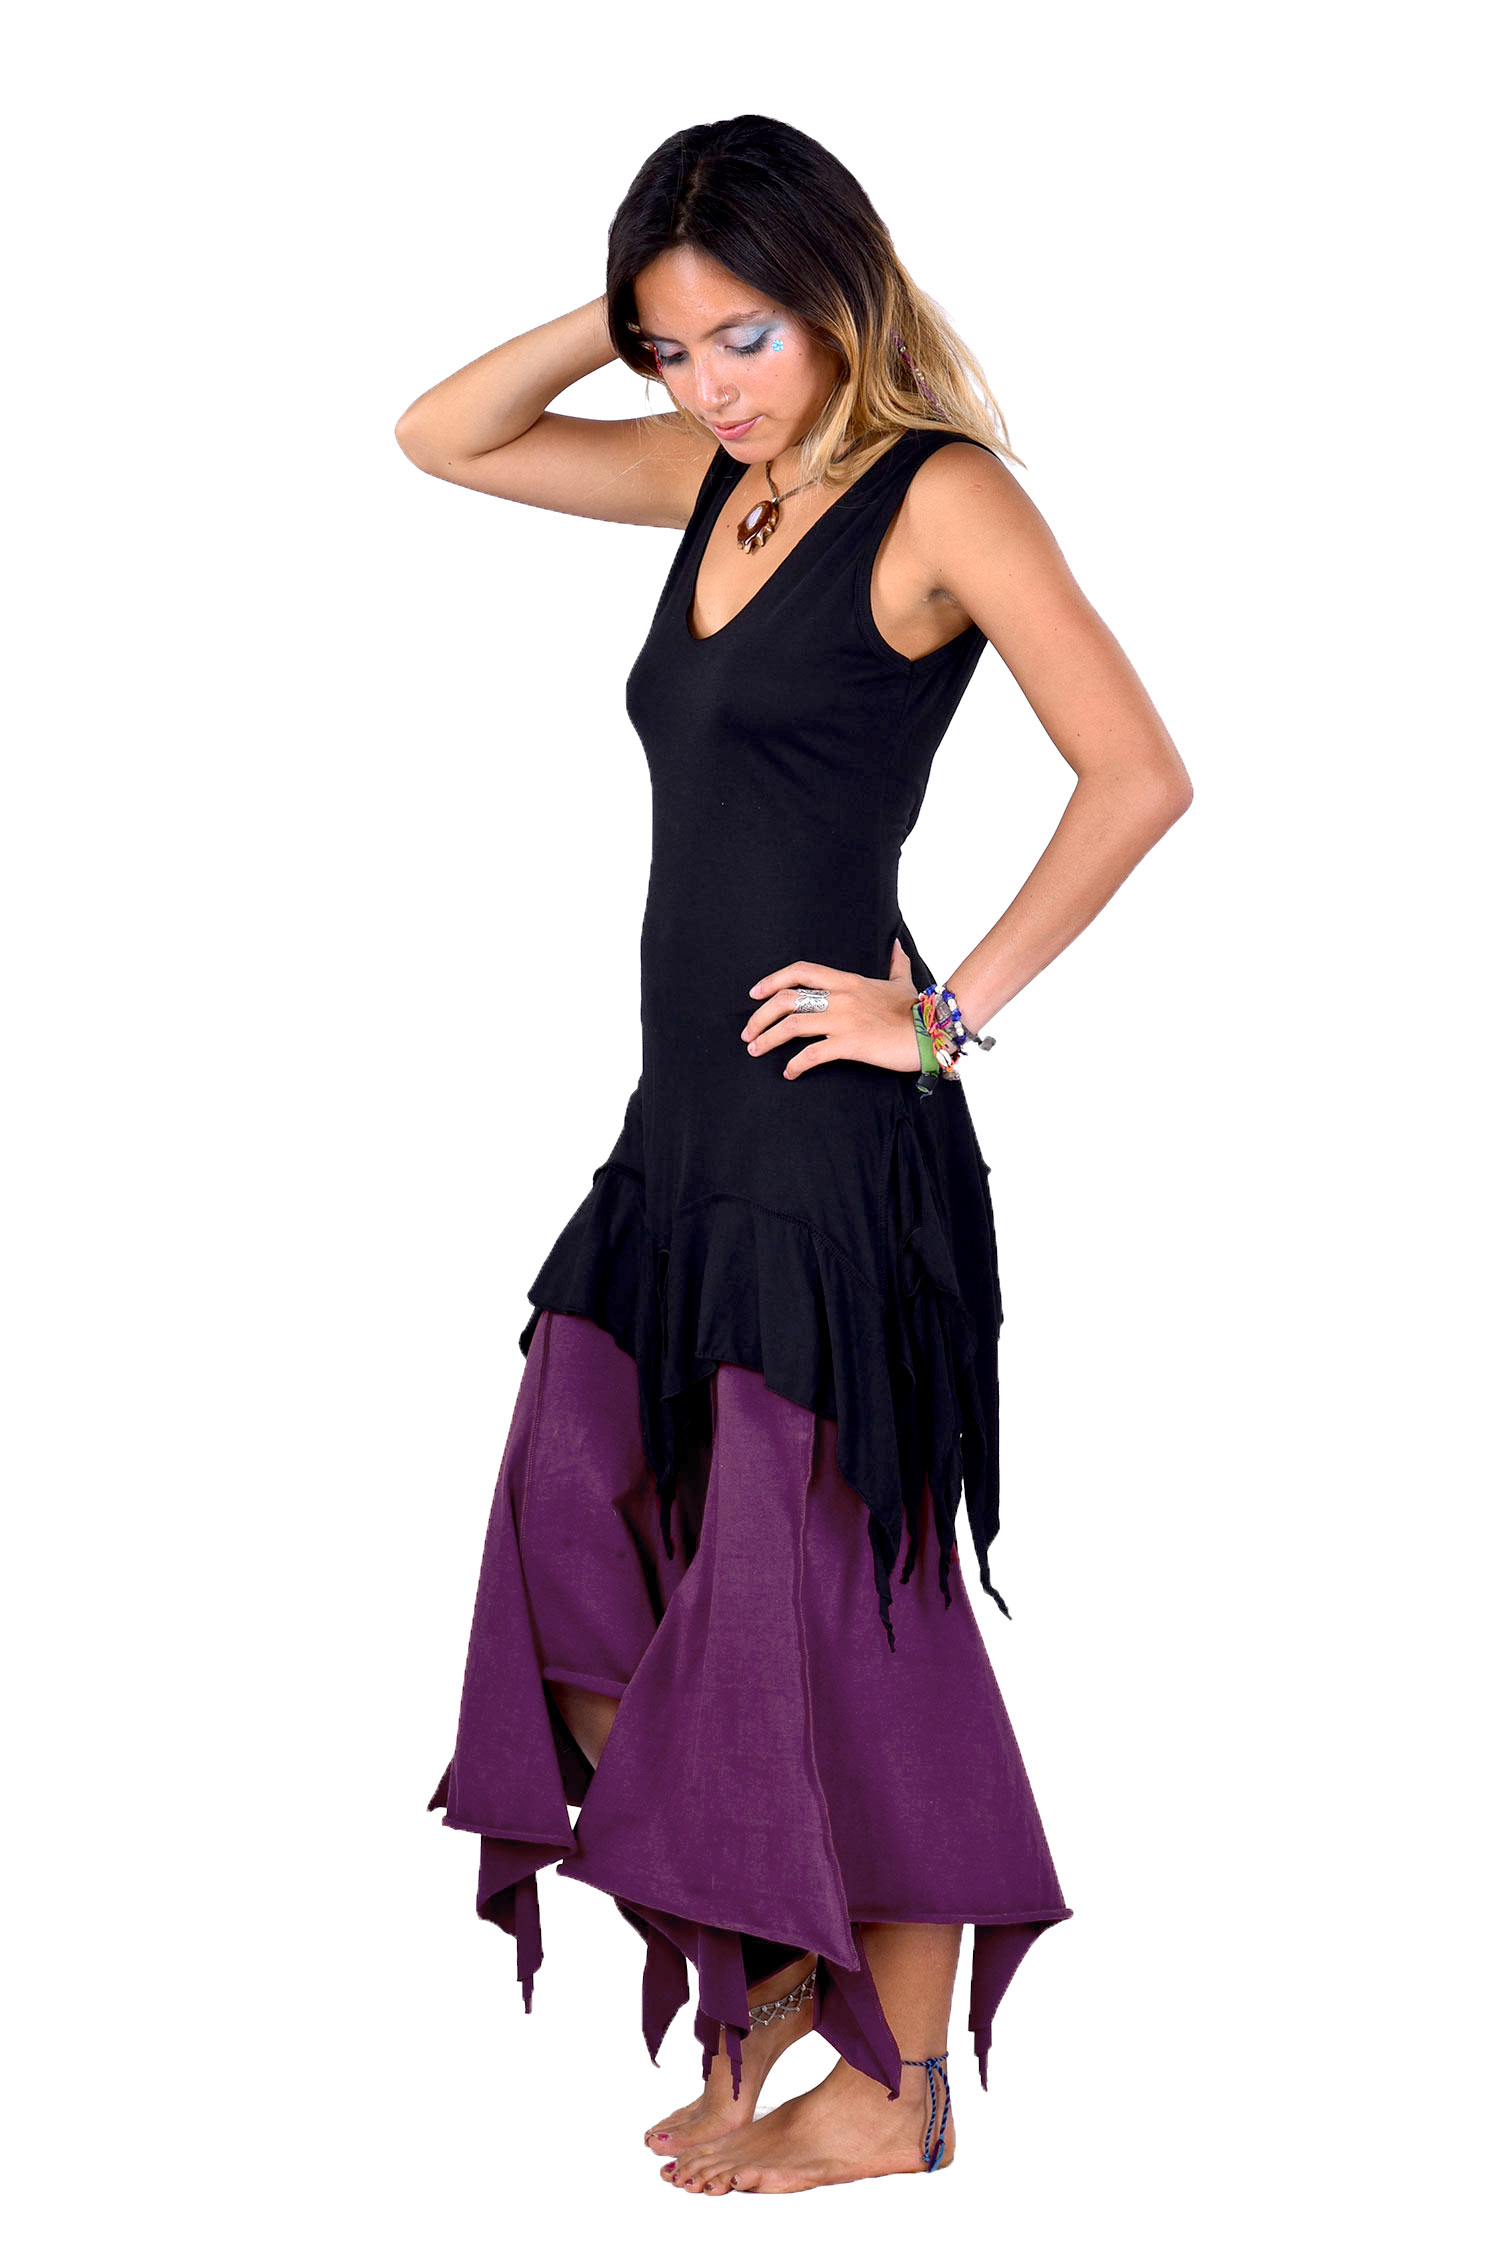 Pixie Pirate Pants, Psy Trance Festival Pirate Trousers | Altshop UK